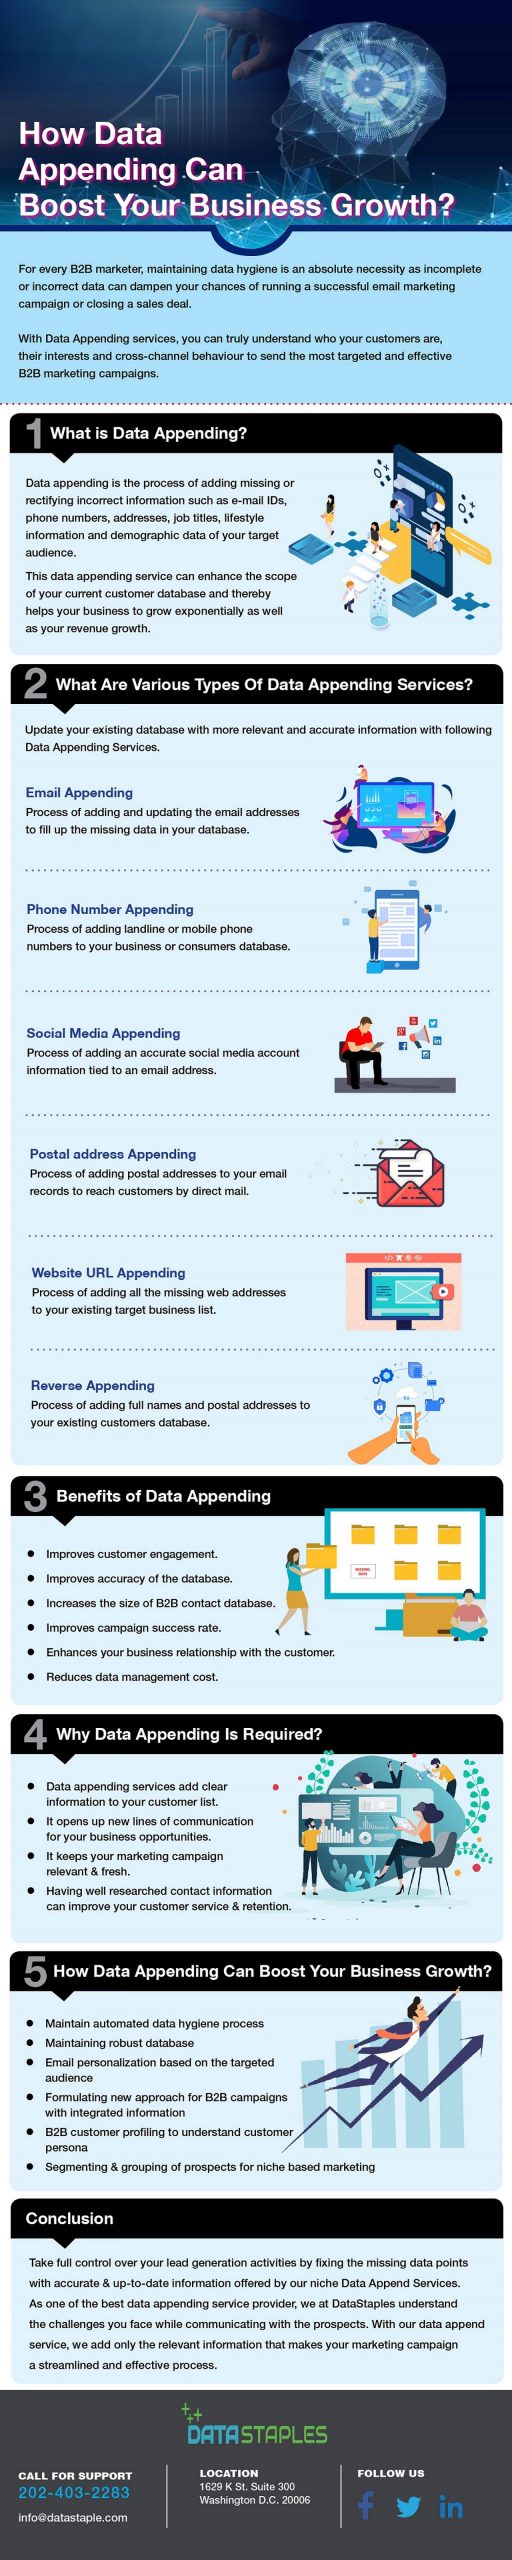 How Data Appending Can Boost Your Business Growth | DataStaples